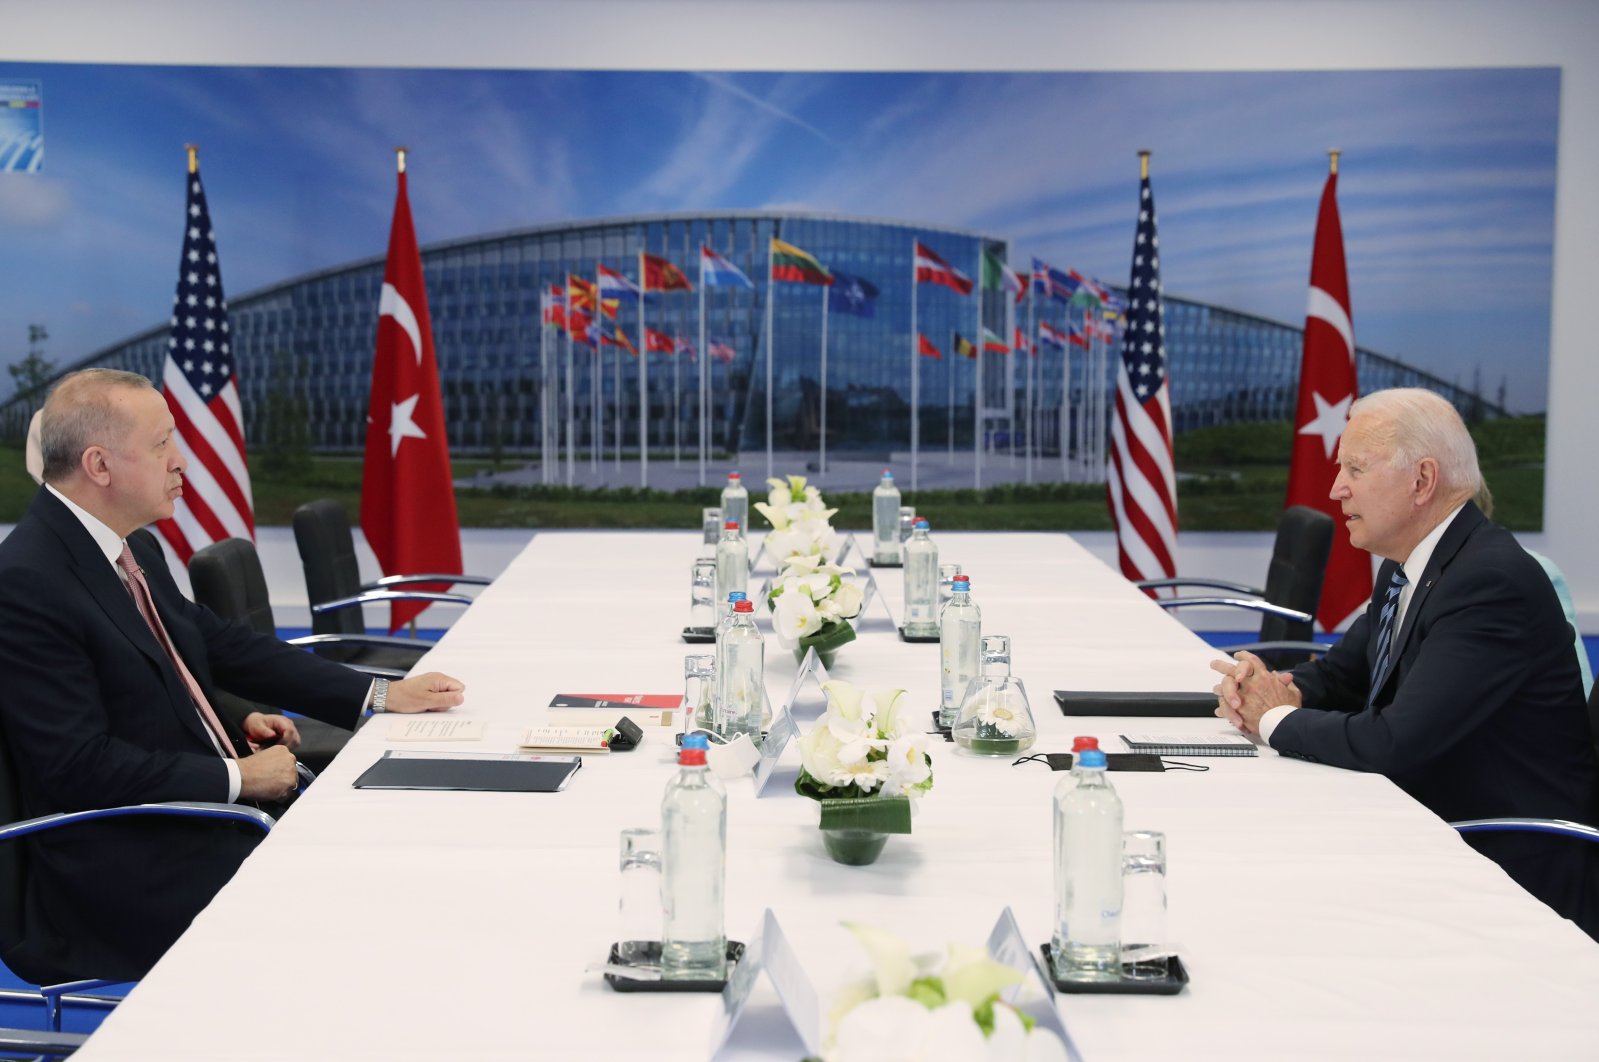 The book on Turkey's counterterrorism efforts is seen on the table as President Recep Tayyip Erdoğan holds a meeting with U.S. President Joe Biden on the sidelines of the NATO summit in Brussels, Belgium, June 14, 2021. (IHA Photo)